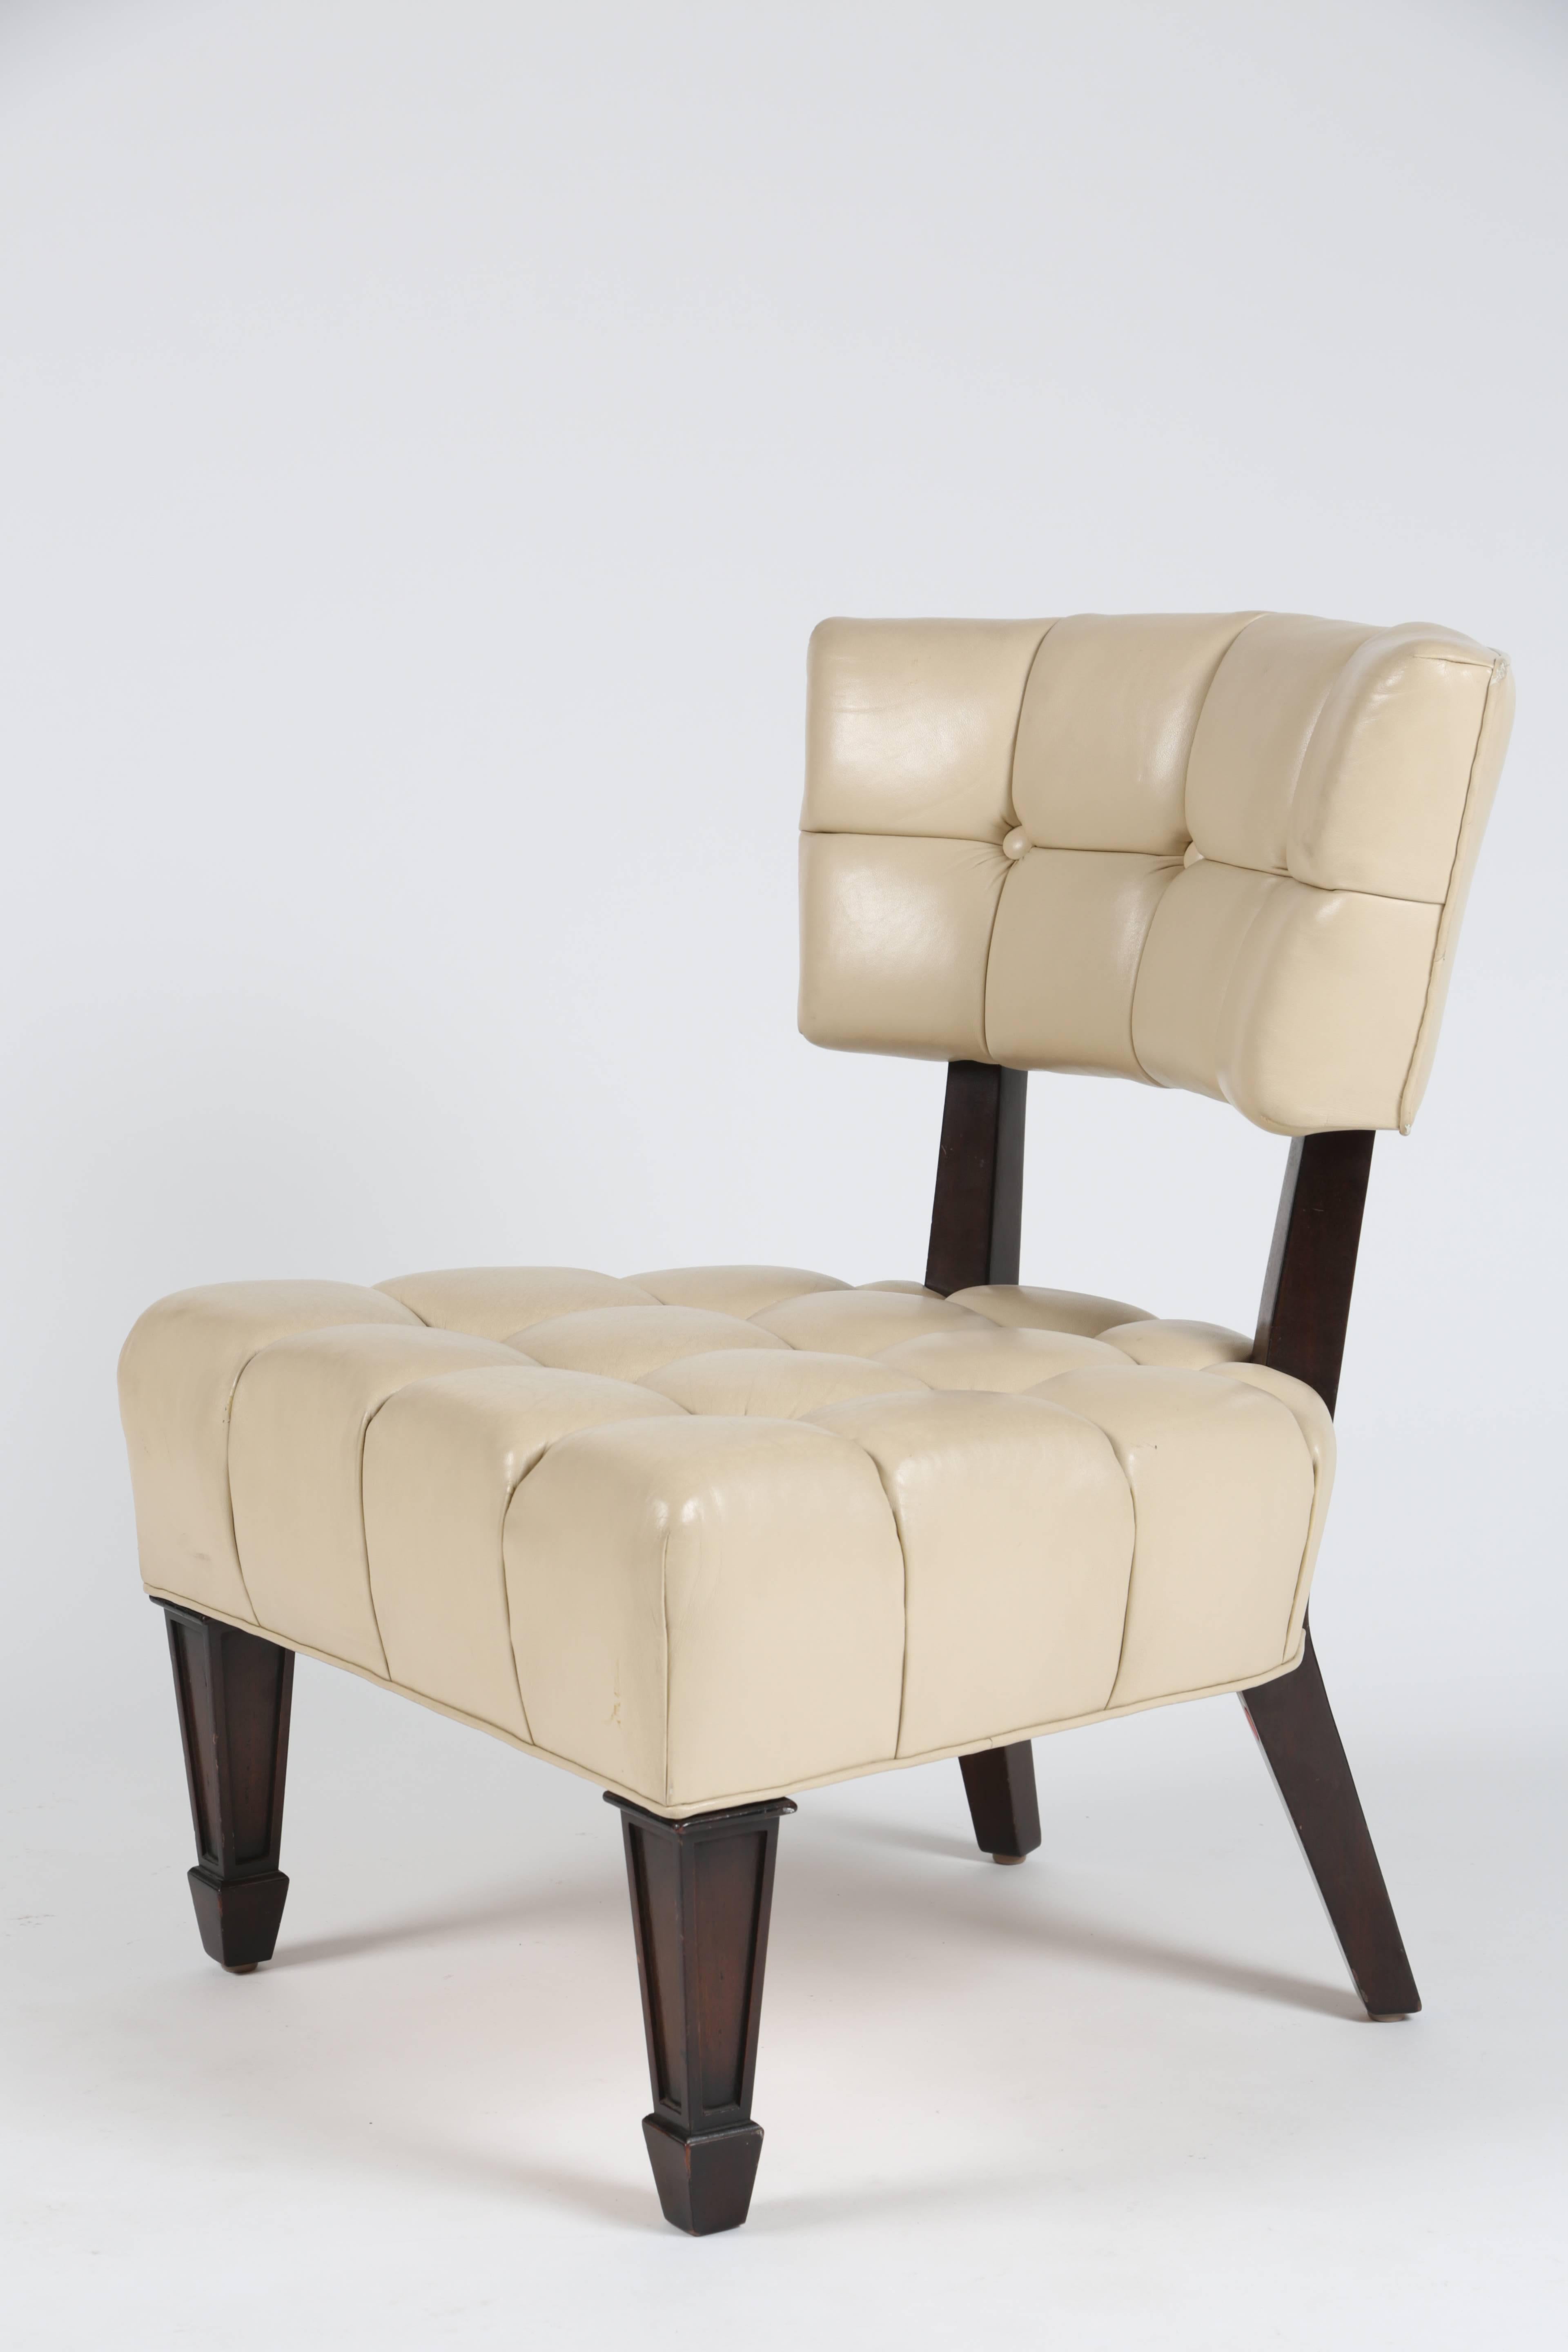 American Pair of Tufted Leather Pull Up Chairs by William 